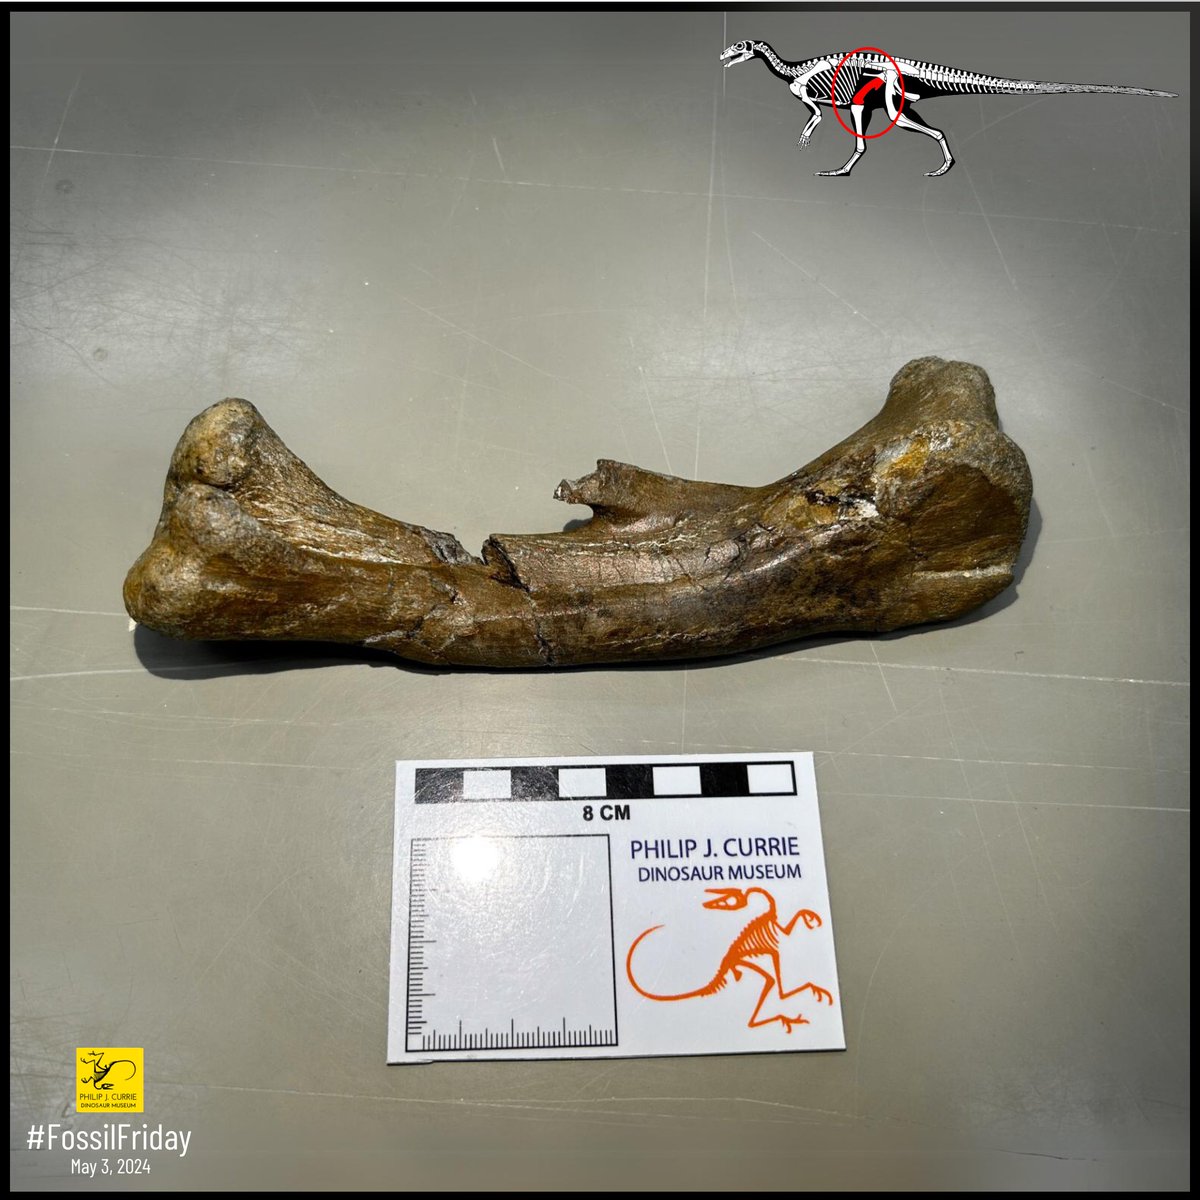 #FossilFriday! This week, we have an exciting fossil found in 2023. This is a Thescelosaurus femur (upper leg bone). This type of dinosaur is one of the rarer groups from the Grande Prairie region, so this bone helps us fill the gap of what other dinosaurs lived in the region.